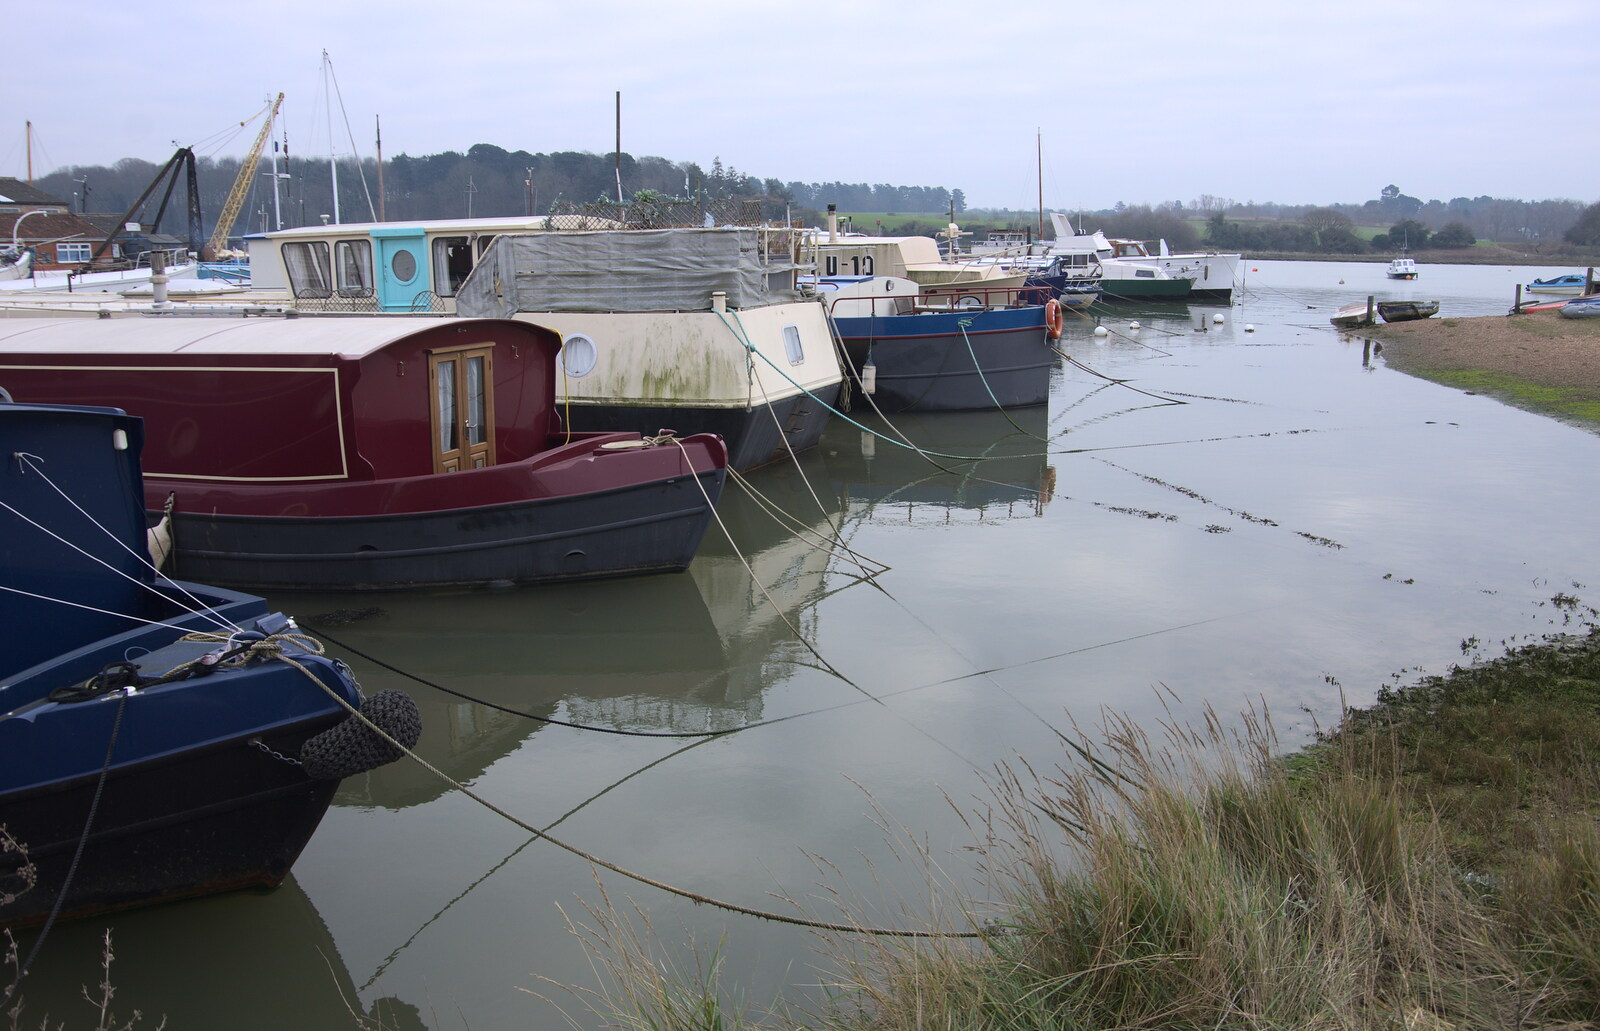 Boats in the river from A Postcard From Woodbridge, Suffolk - 4th January 2019